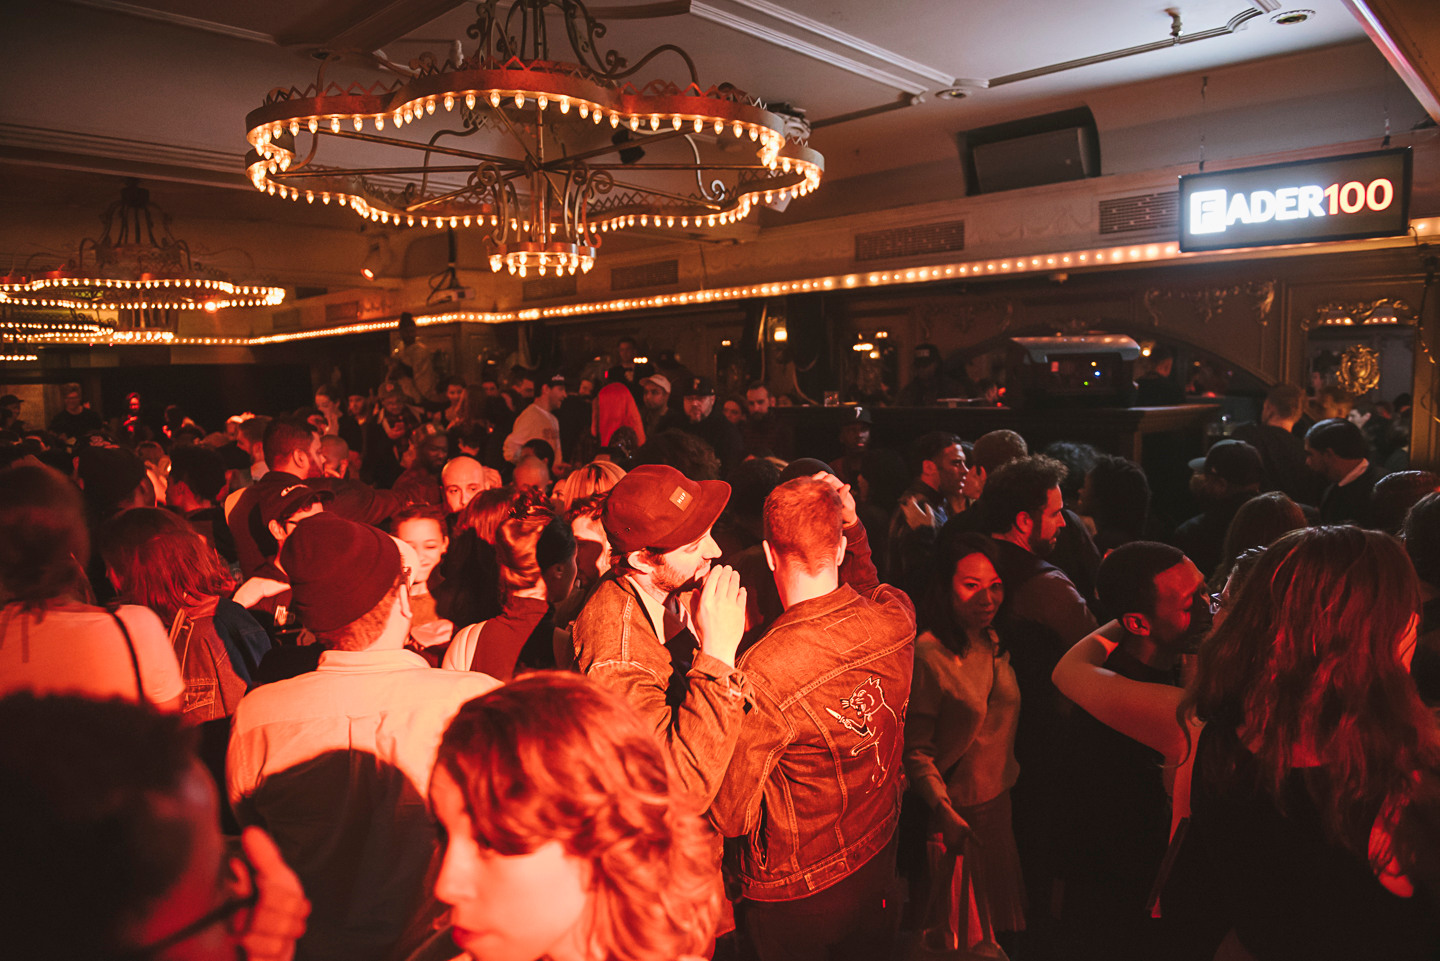 The FADER’s 100th Release Party Was Pure Fire